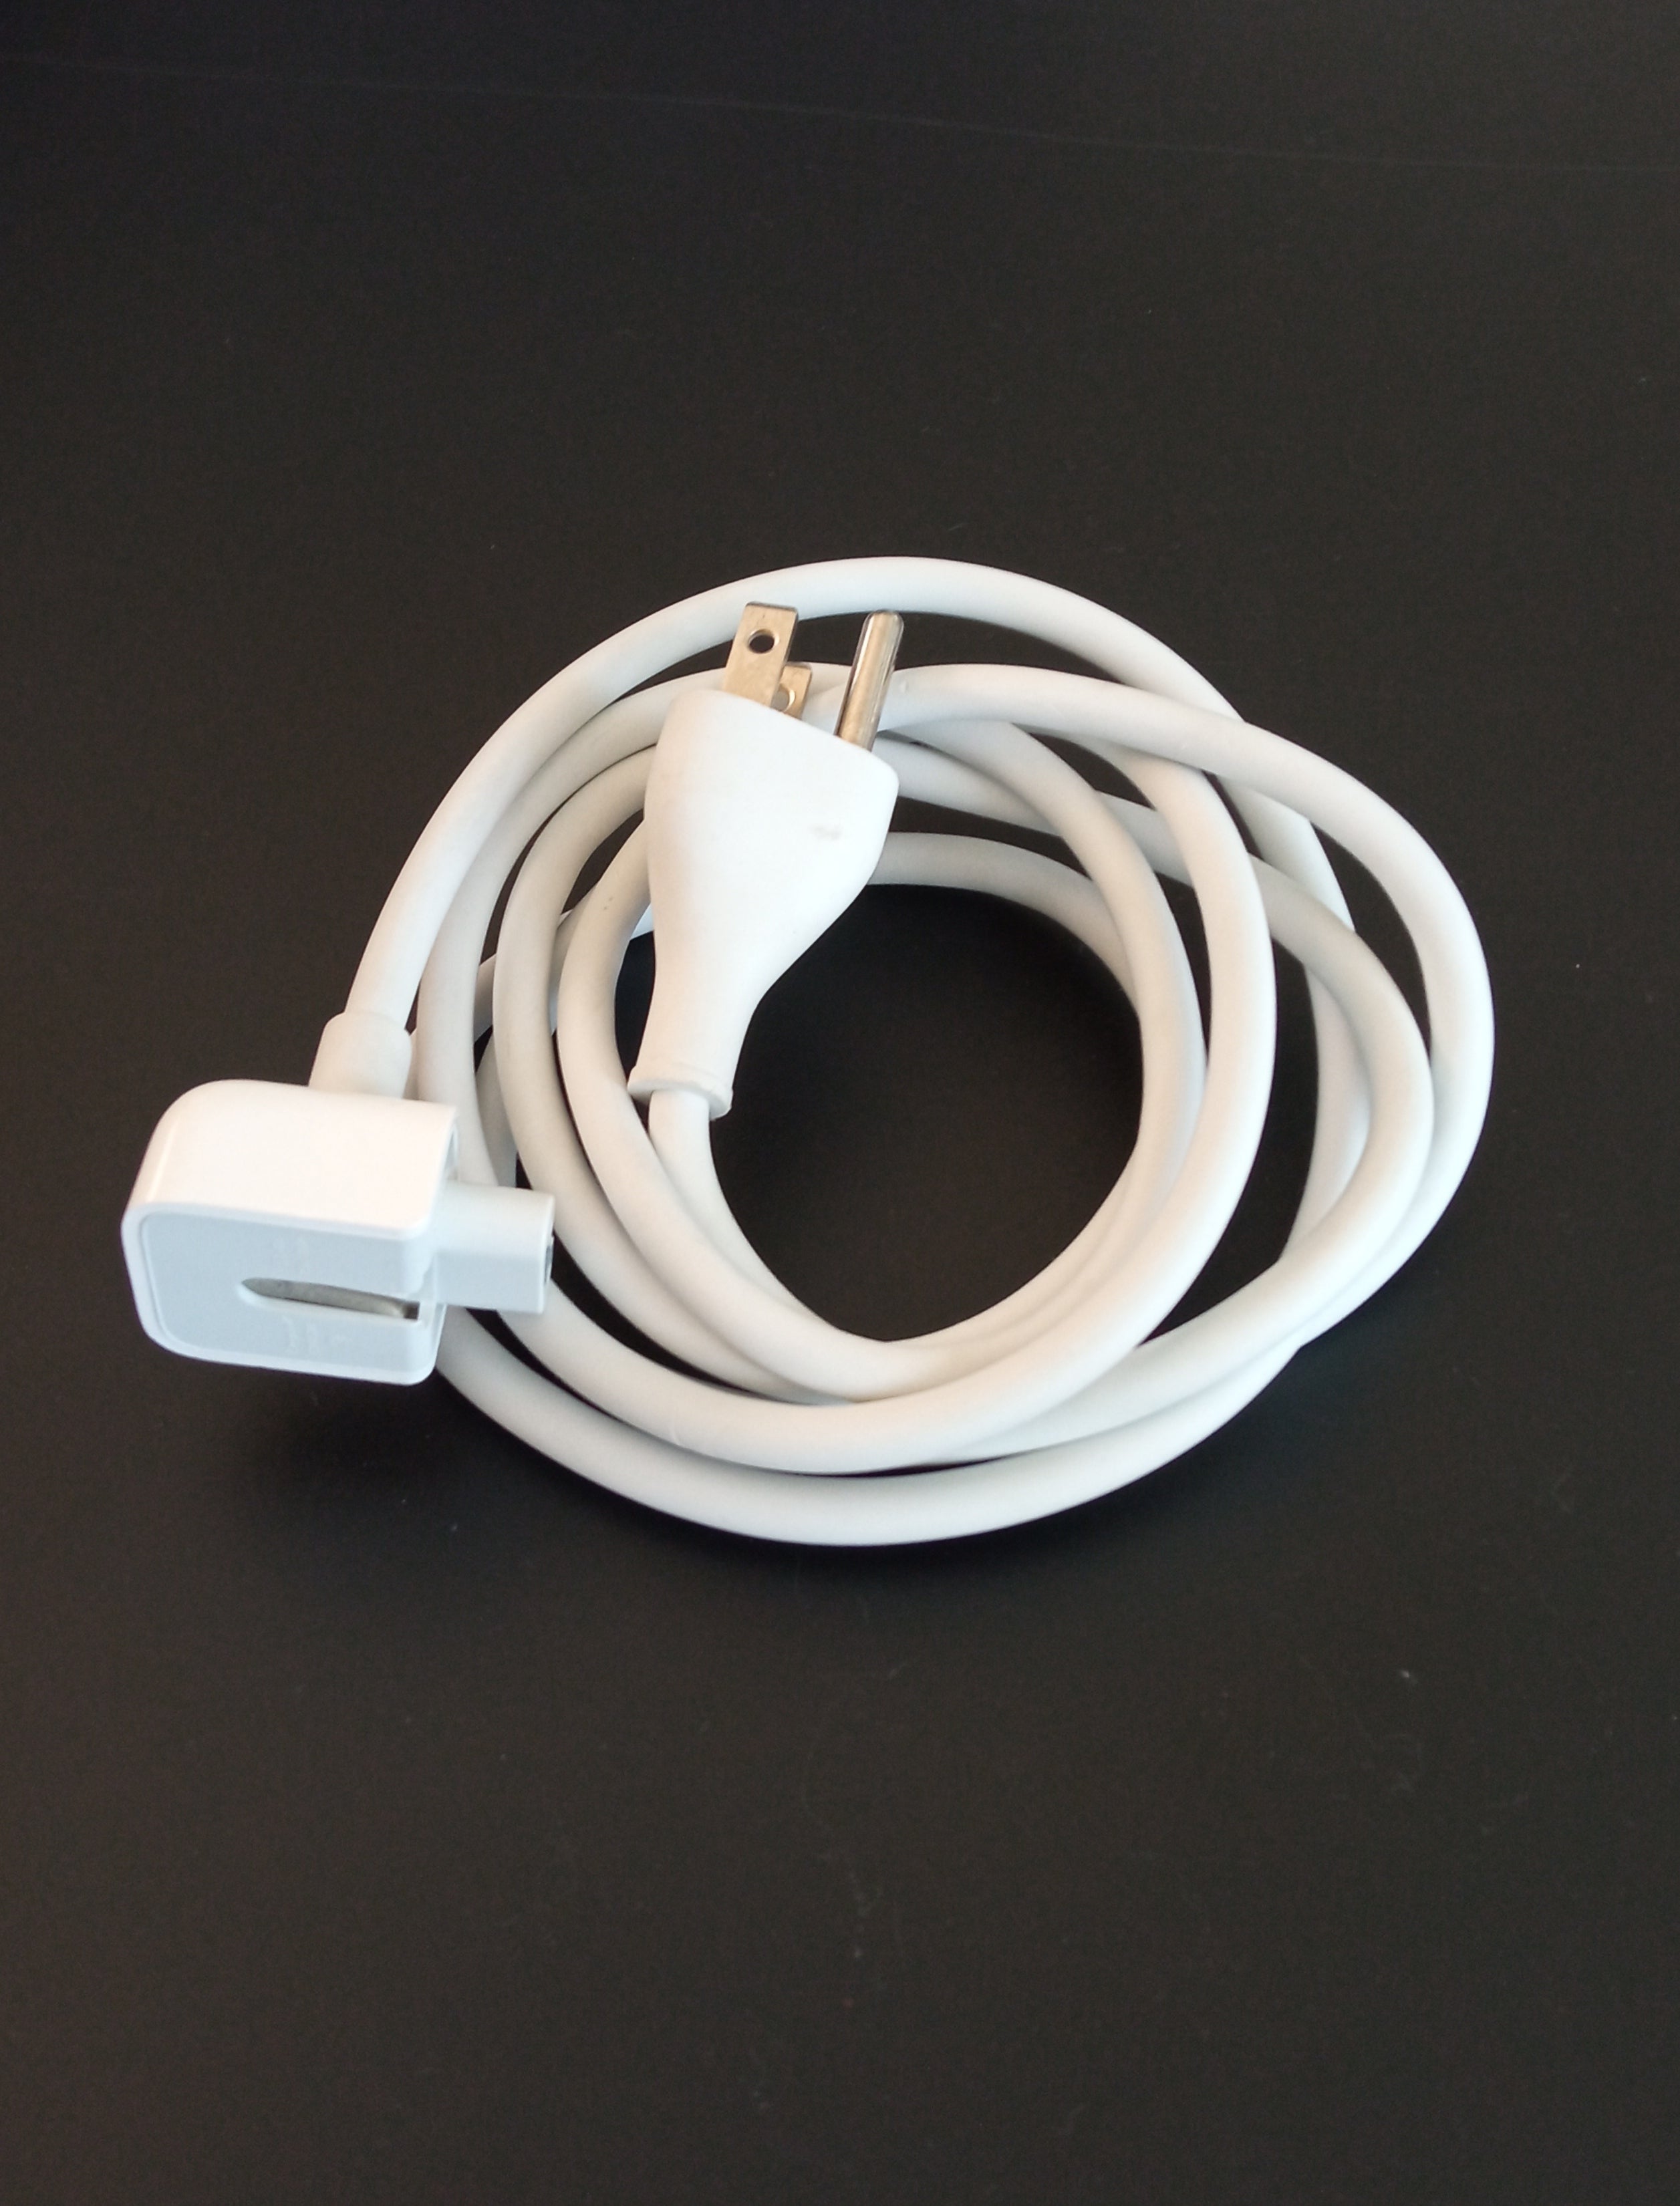 6 Feet US Extension Cord Cable For all Apple MacBook Pro & Macbook air chargers / Power Adapter